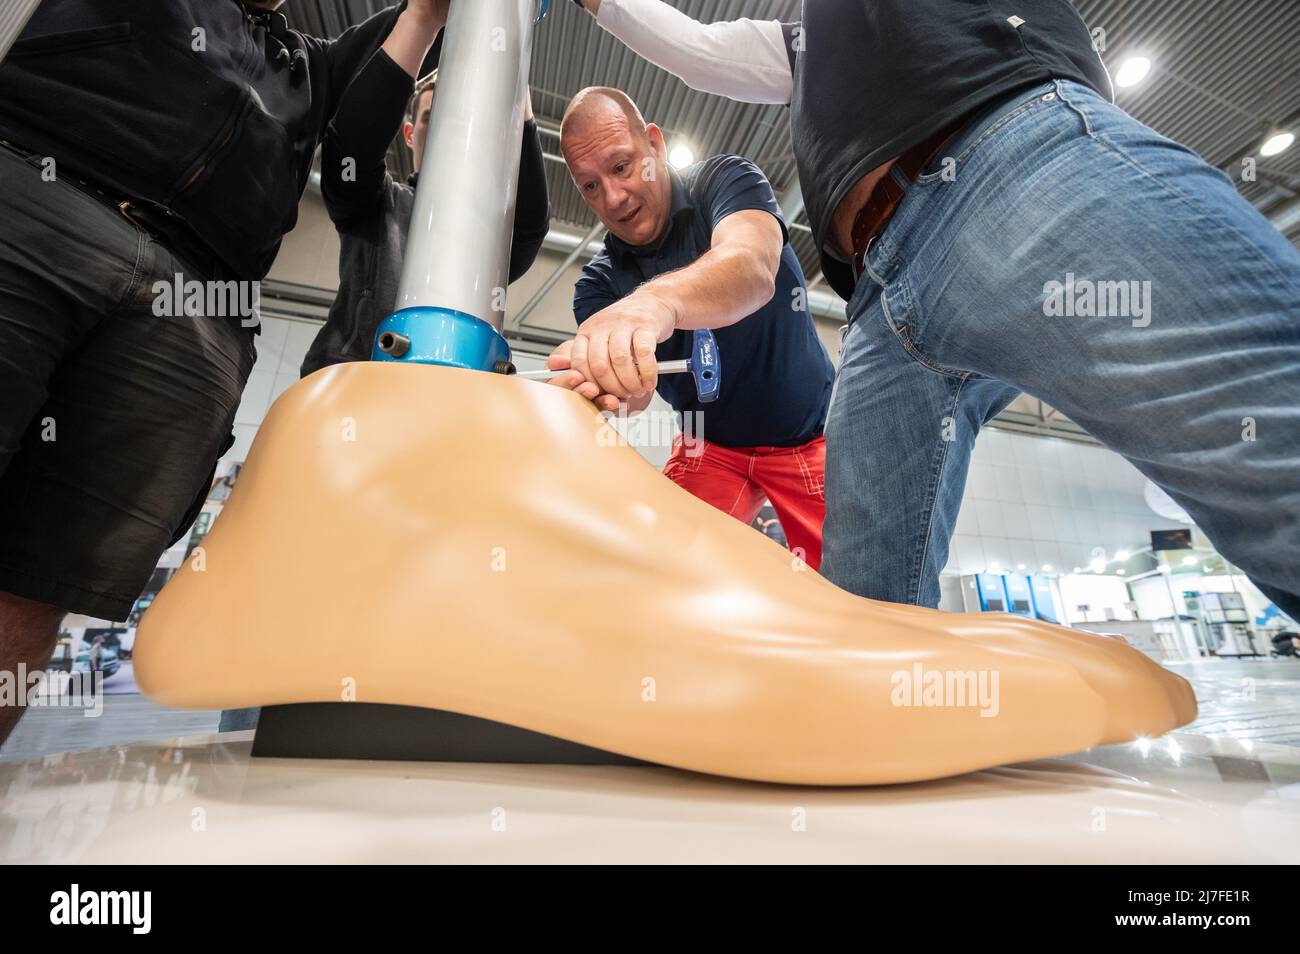 Leipzig, Germany. 09th May, 2022. Mathias Börner, (M) Ottobock sales representative for Saxony and Thuringia, screws on an oversized model of a leg prosthesis. To mark the 25th anniversary of the C-Leg leg prosthesis, the Duderstadt-based company Ottobock is displaying a four-meter-high model of it at OTWorld 2022, the world's leading trade fair for orthopaedic and rehabilitation technology. It was the world's first mechatronic knee joint. The C-Leg technology has now been used in more than 100,000 fittings worldwide. Credit: Christian Modla/dpa/Alamy Live News Stock Photo